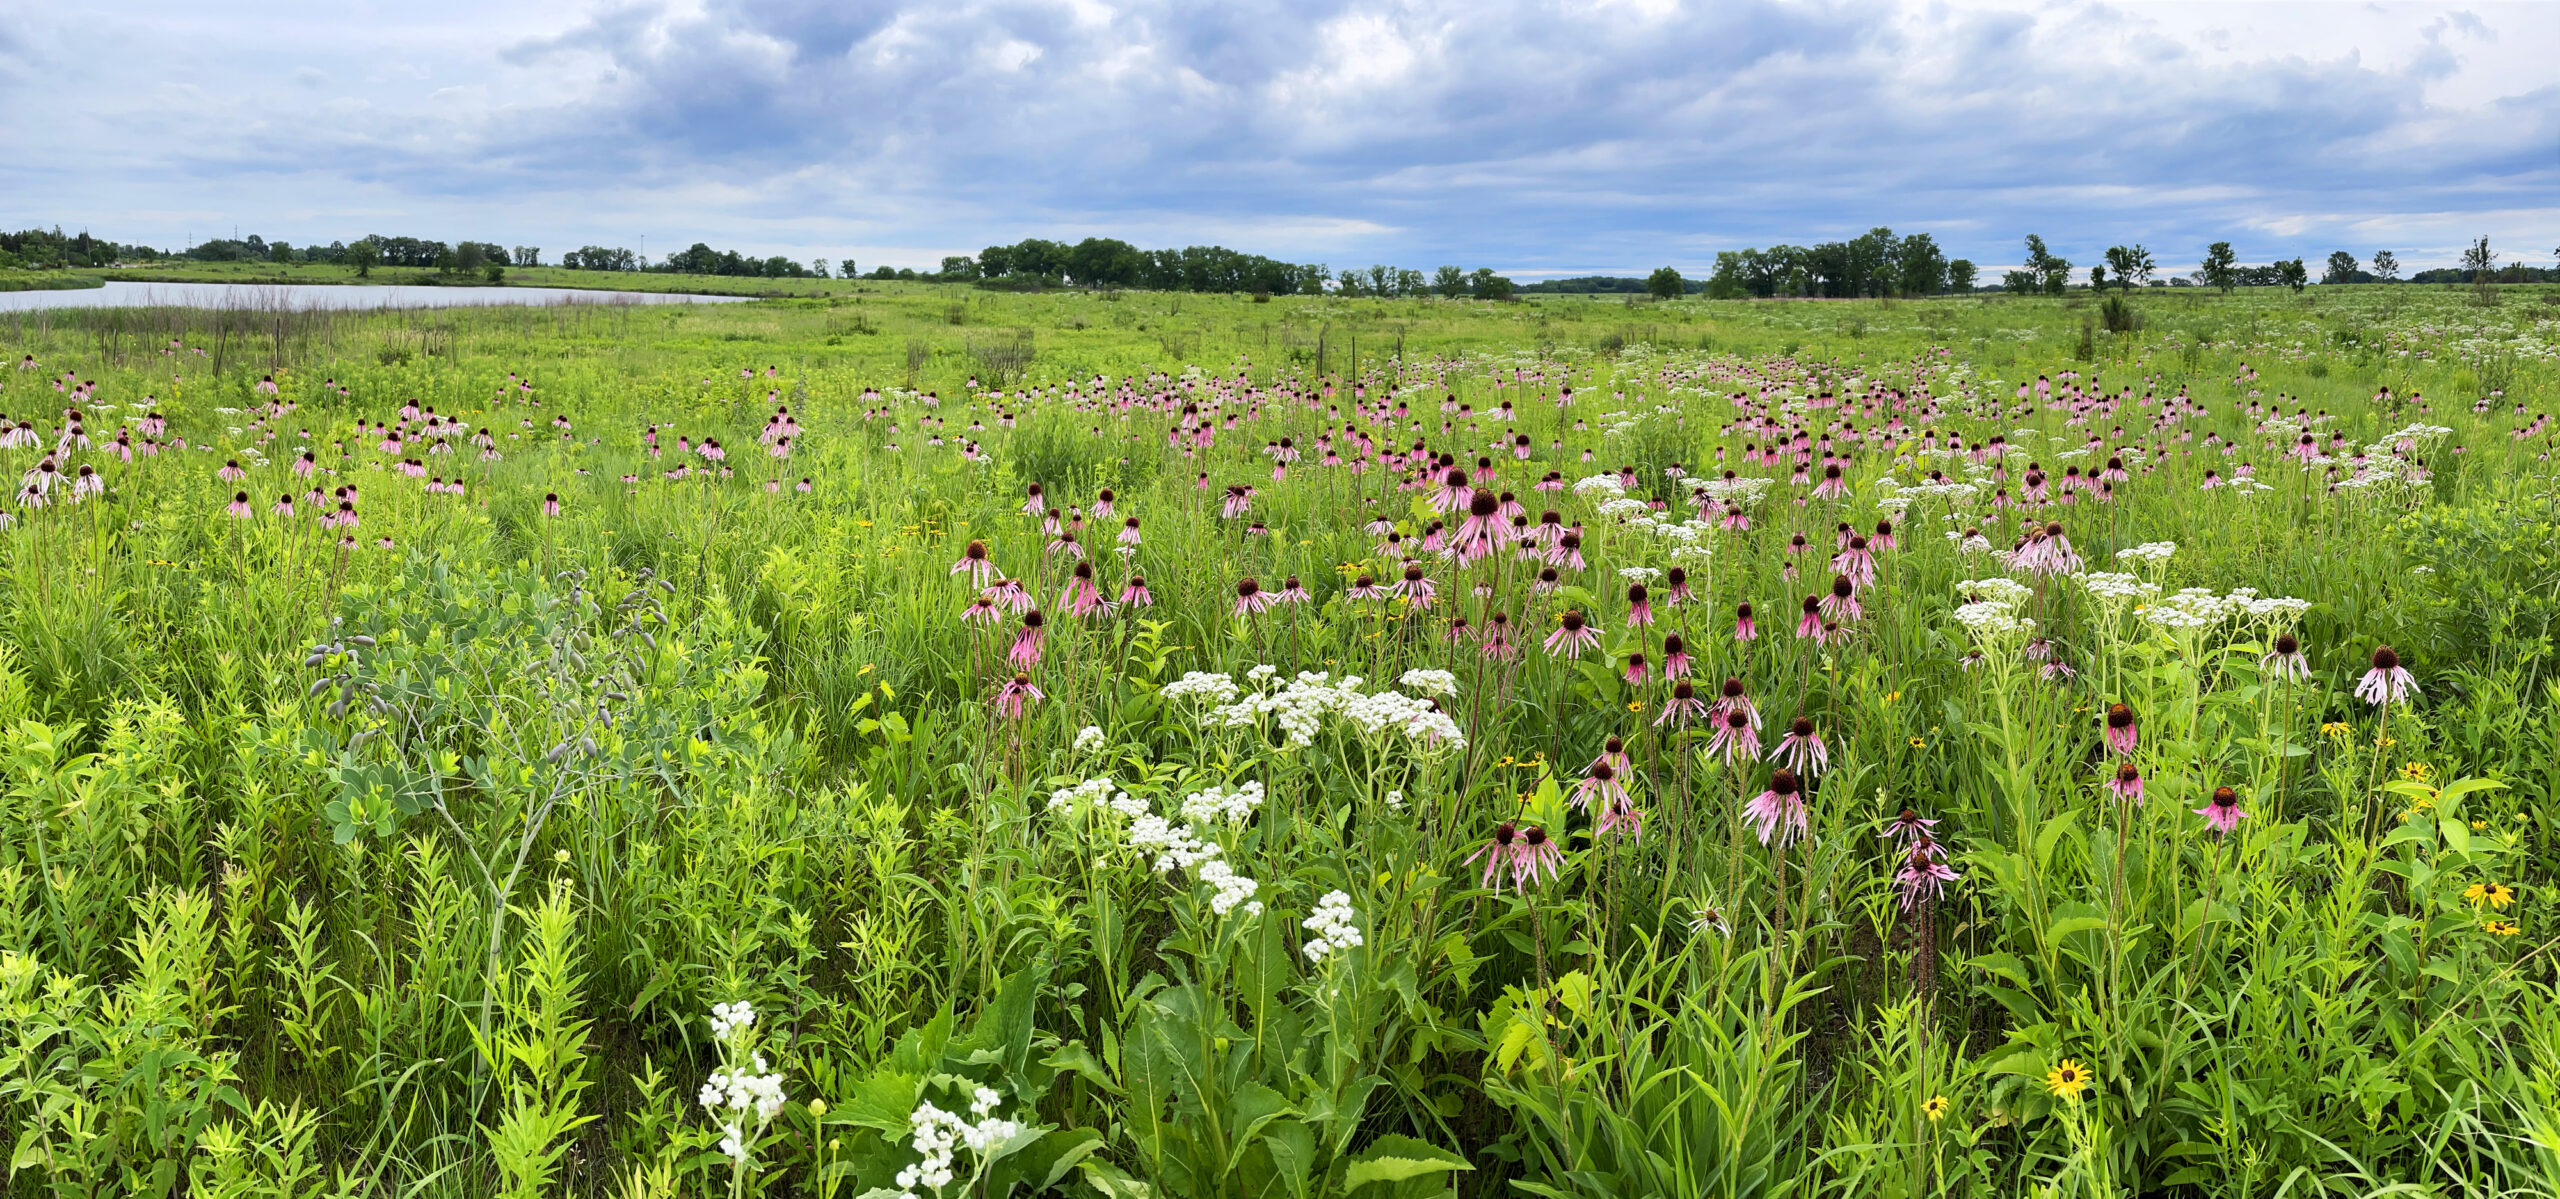 Wild Ones Presents “America’s Public Gardens: A Resource for Native Plants” webinar with Matthew Ross